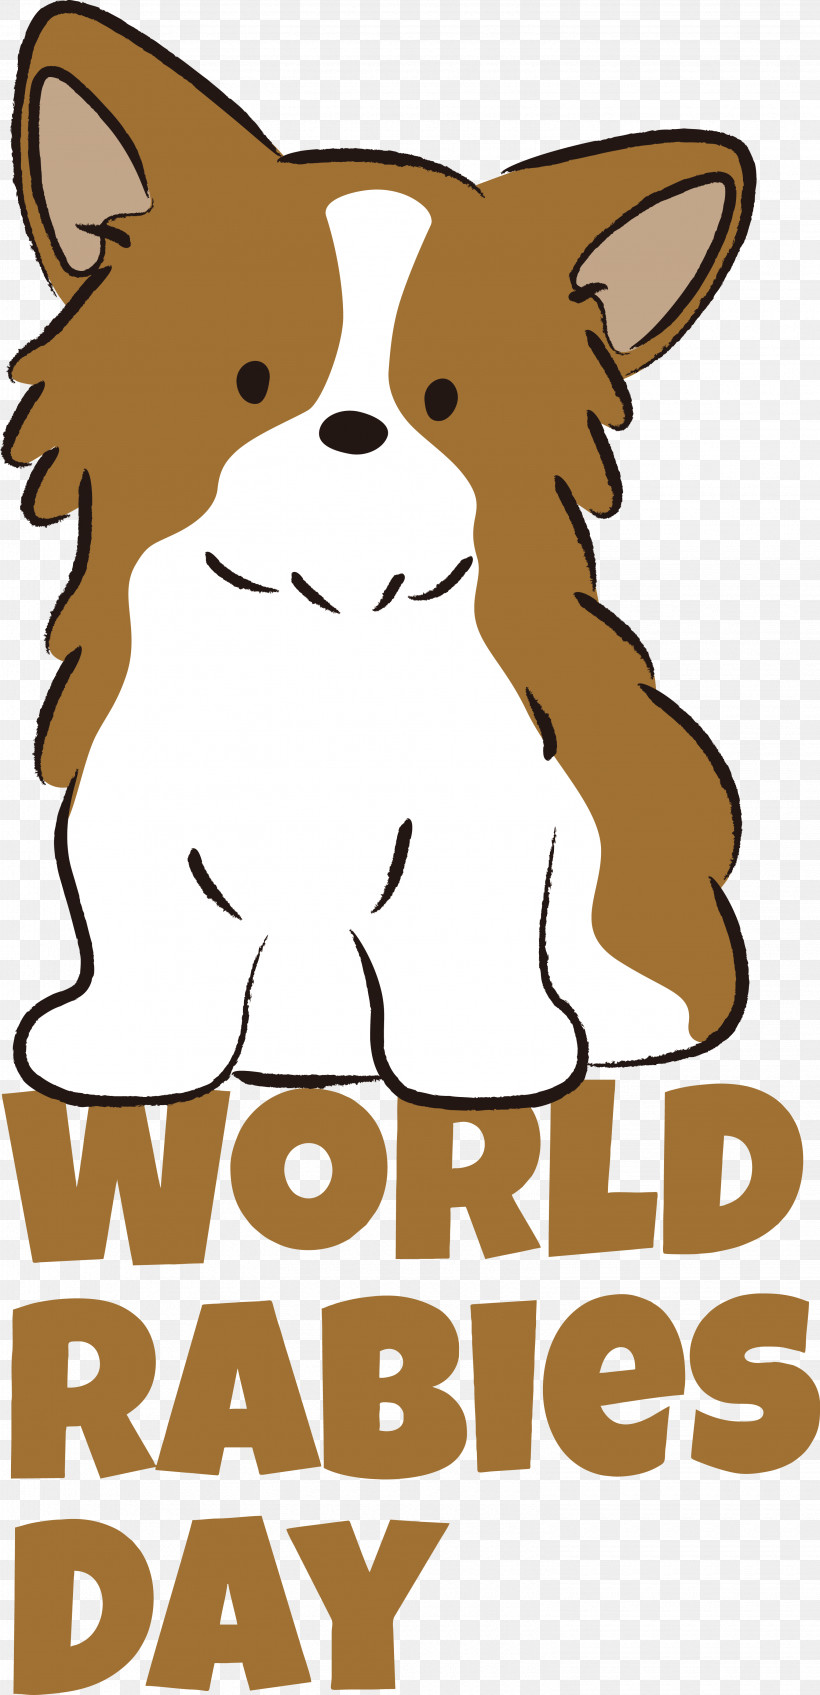 Dog World Rabies Day, PNG, 3055x6318px, Dog, World Rabies Day Download Free